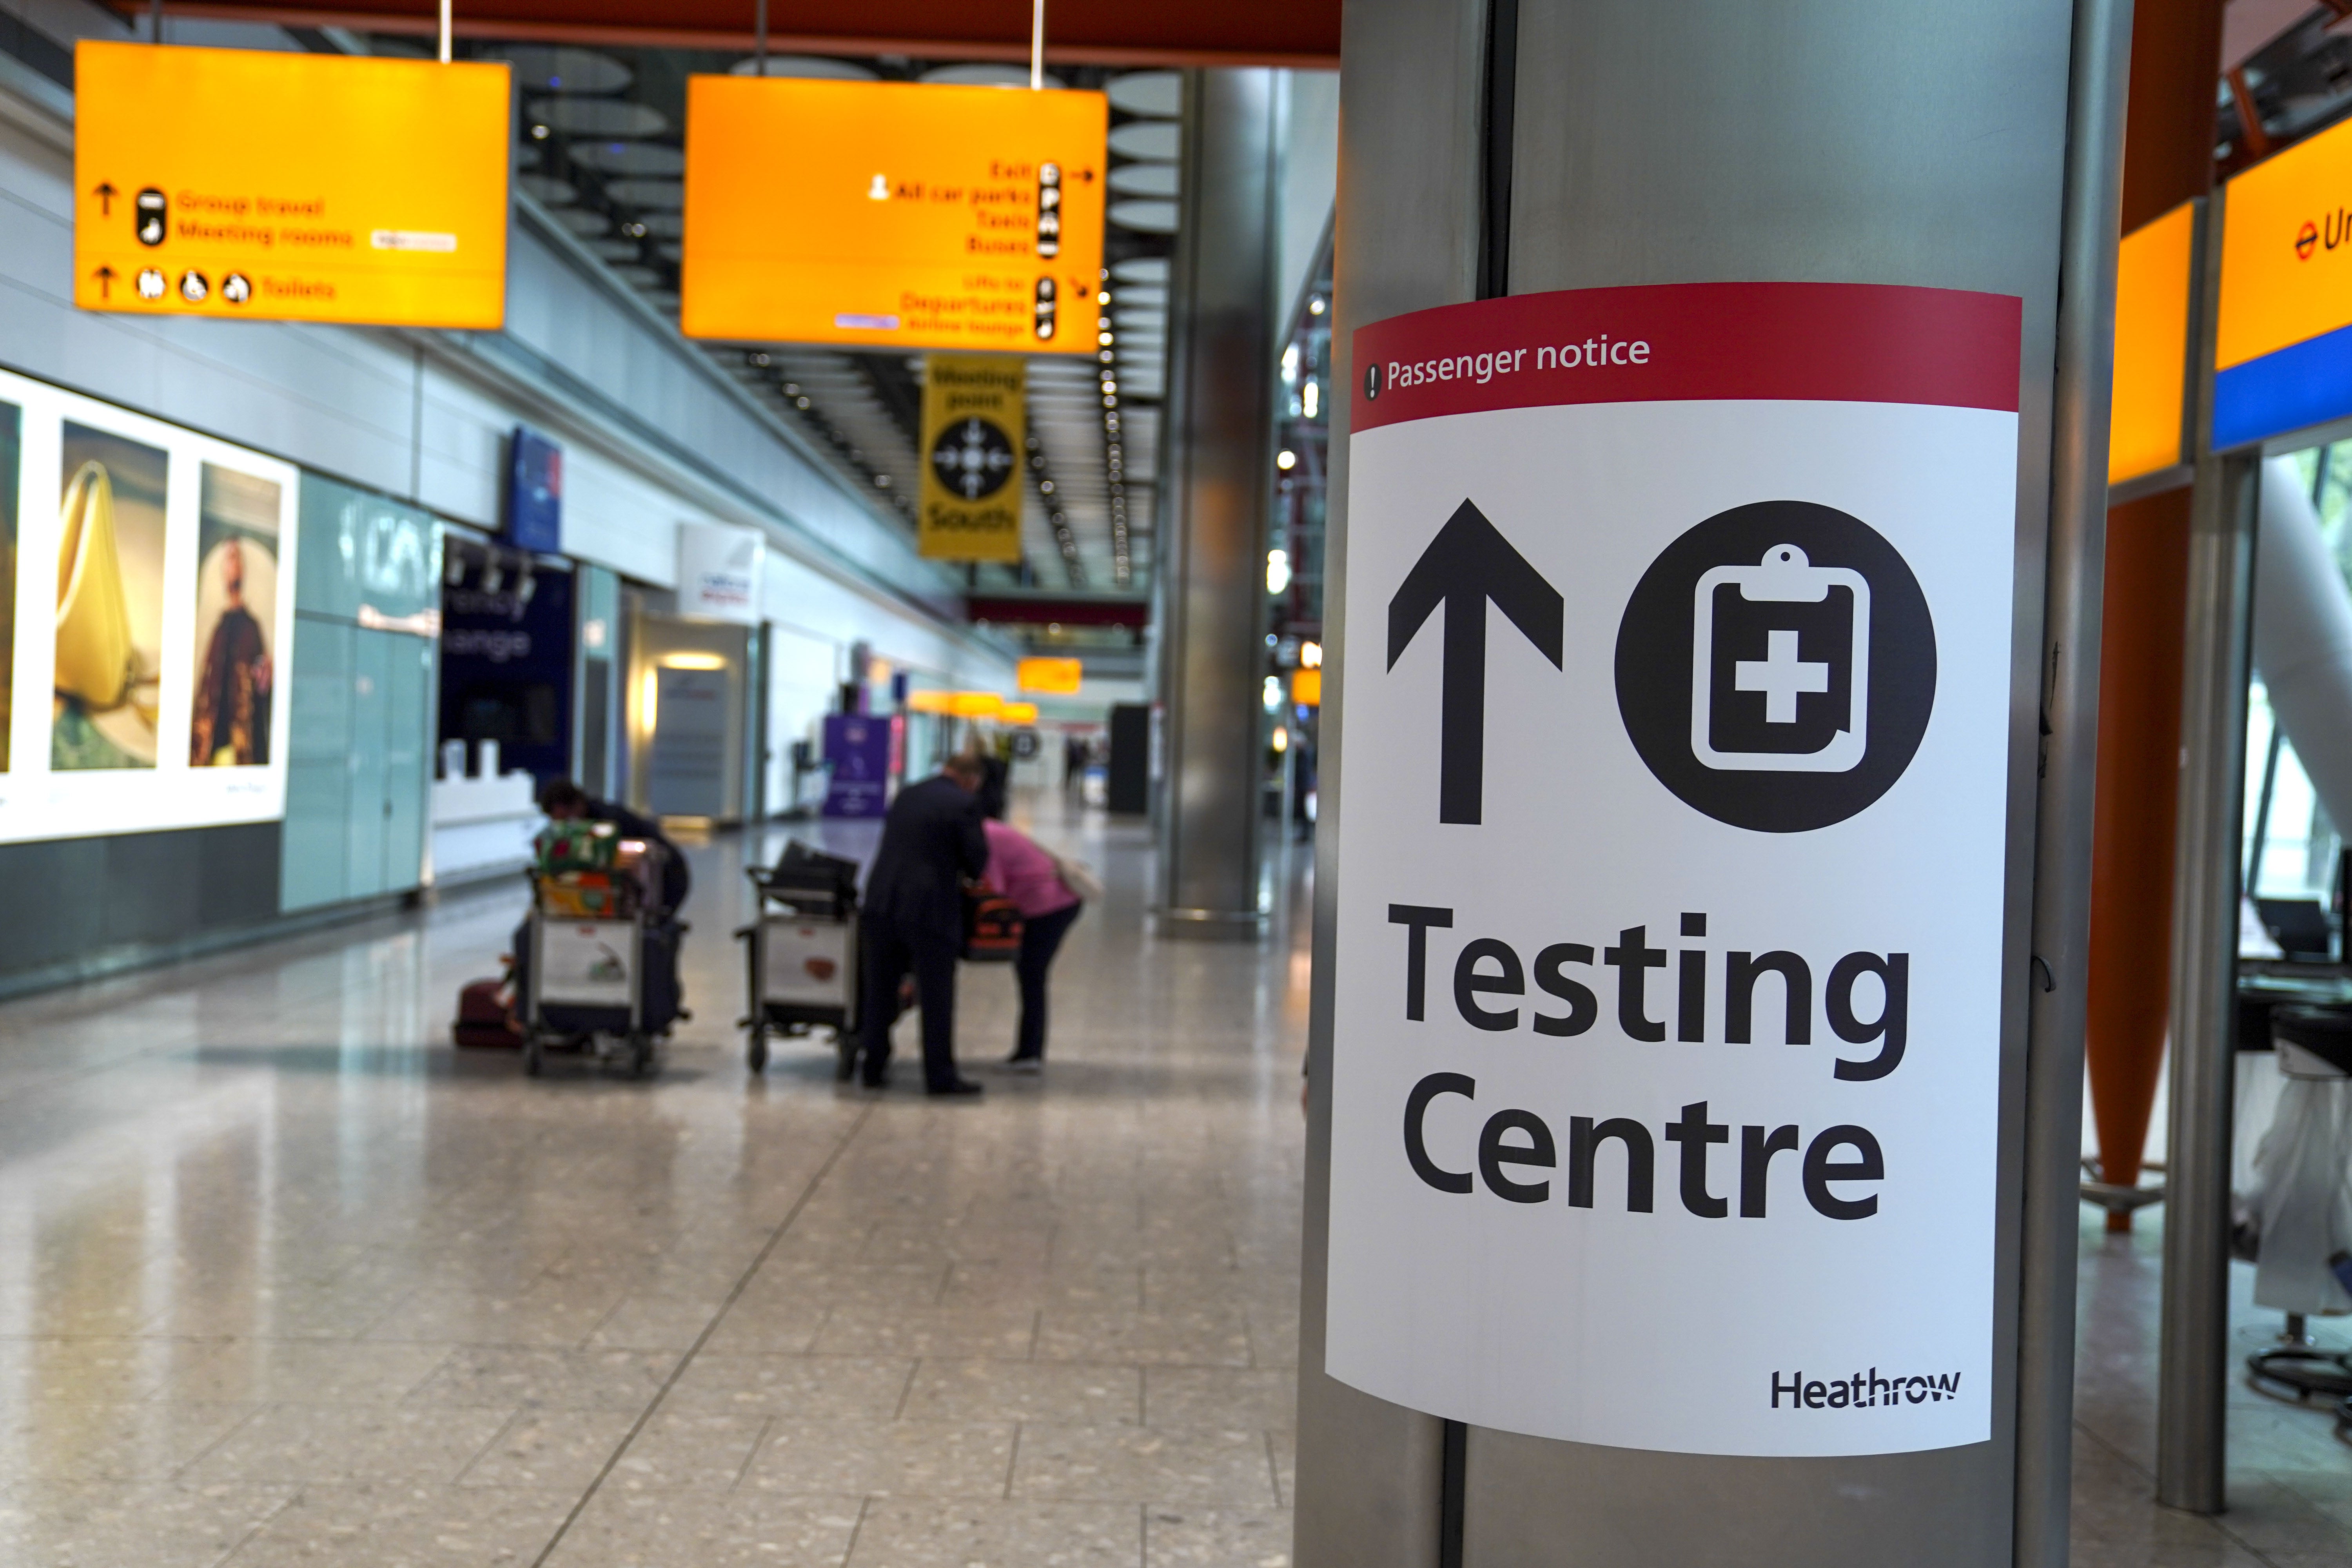 The Transport Committee said travel rules implemented during the Covid pandemic could be confusing (Steve Parsons/PA)